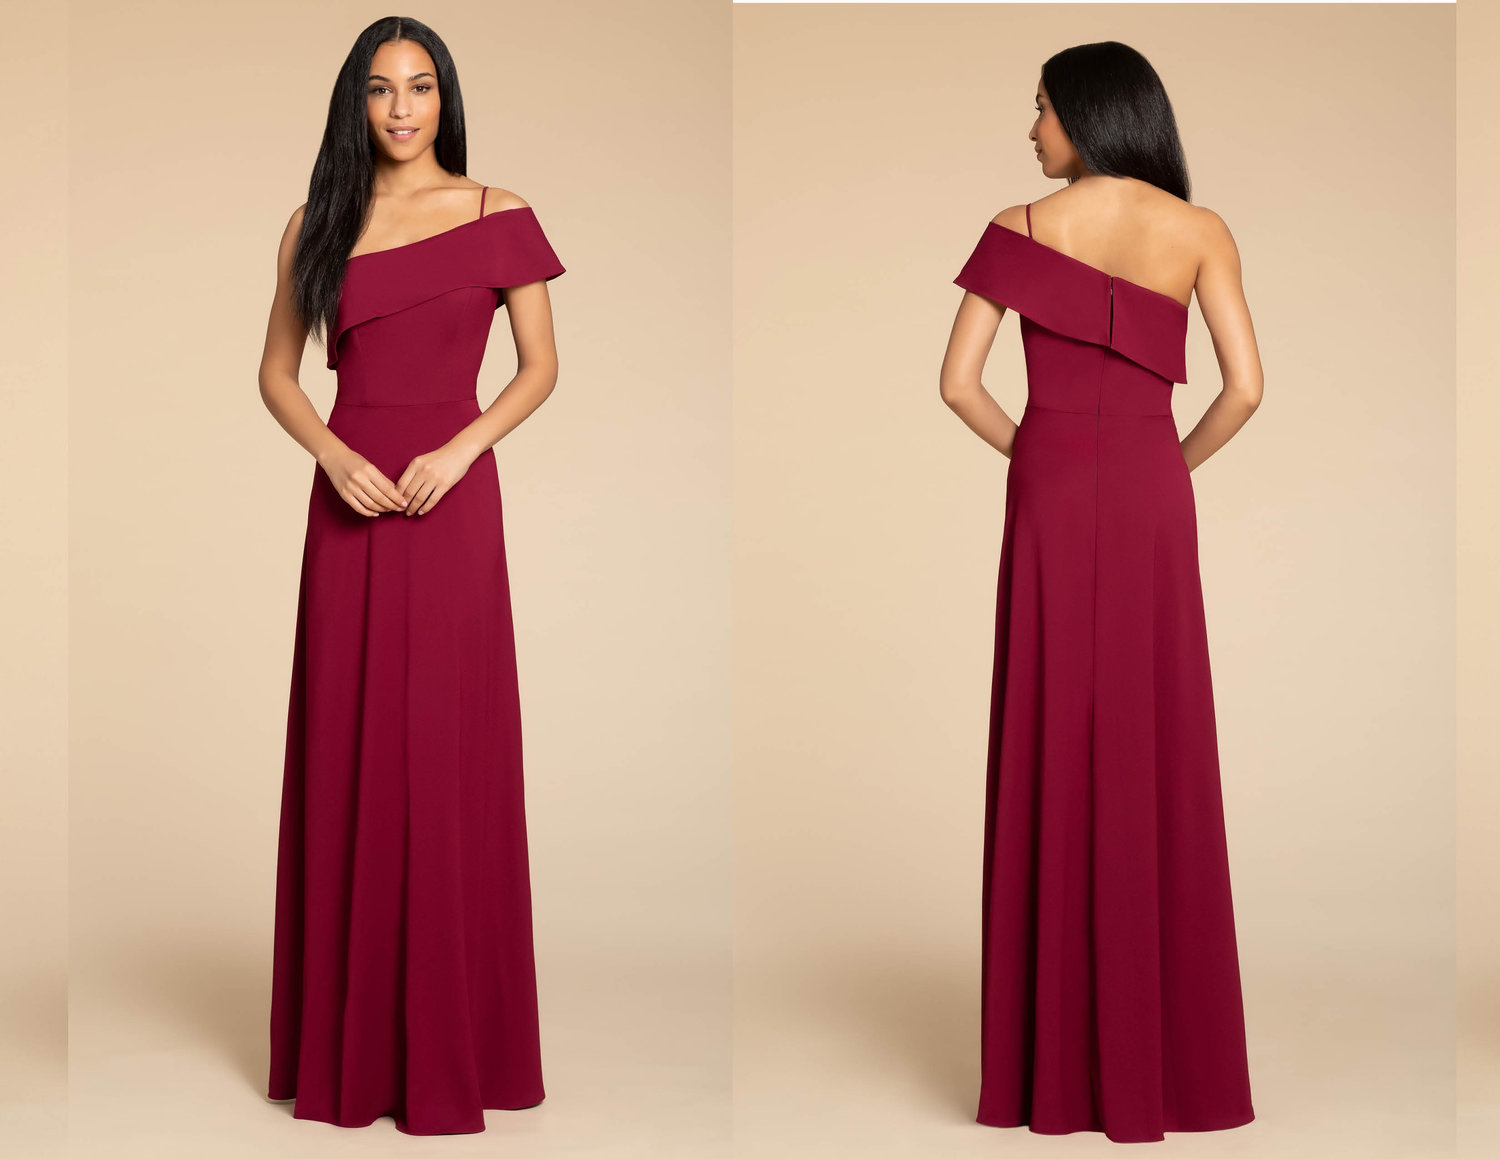 The NEW Hayley Paige Occasions Spring 2019 Bridesmaid Collection Is Now ...